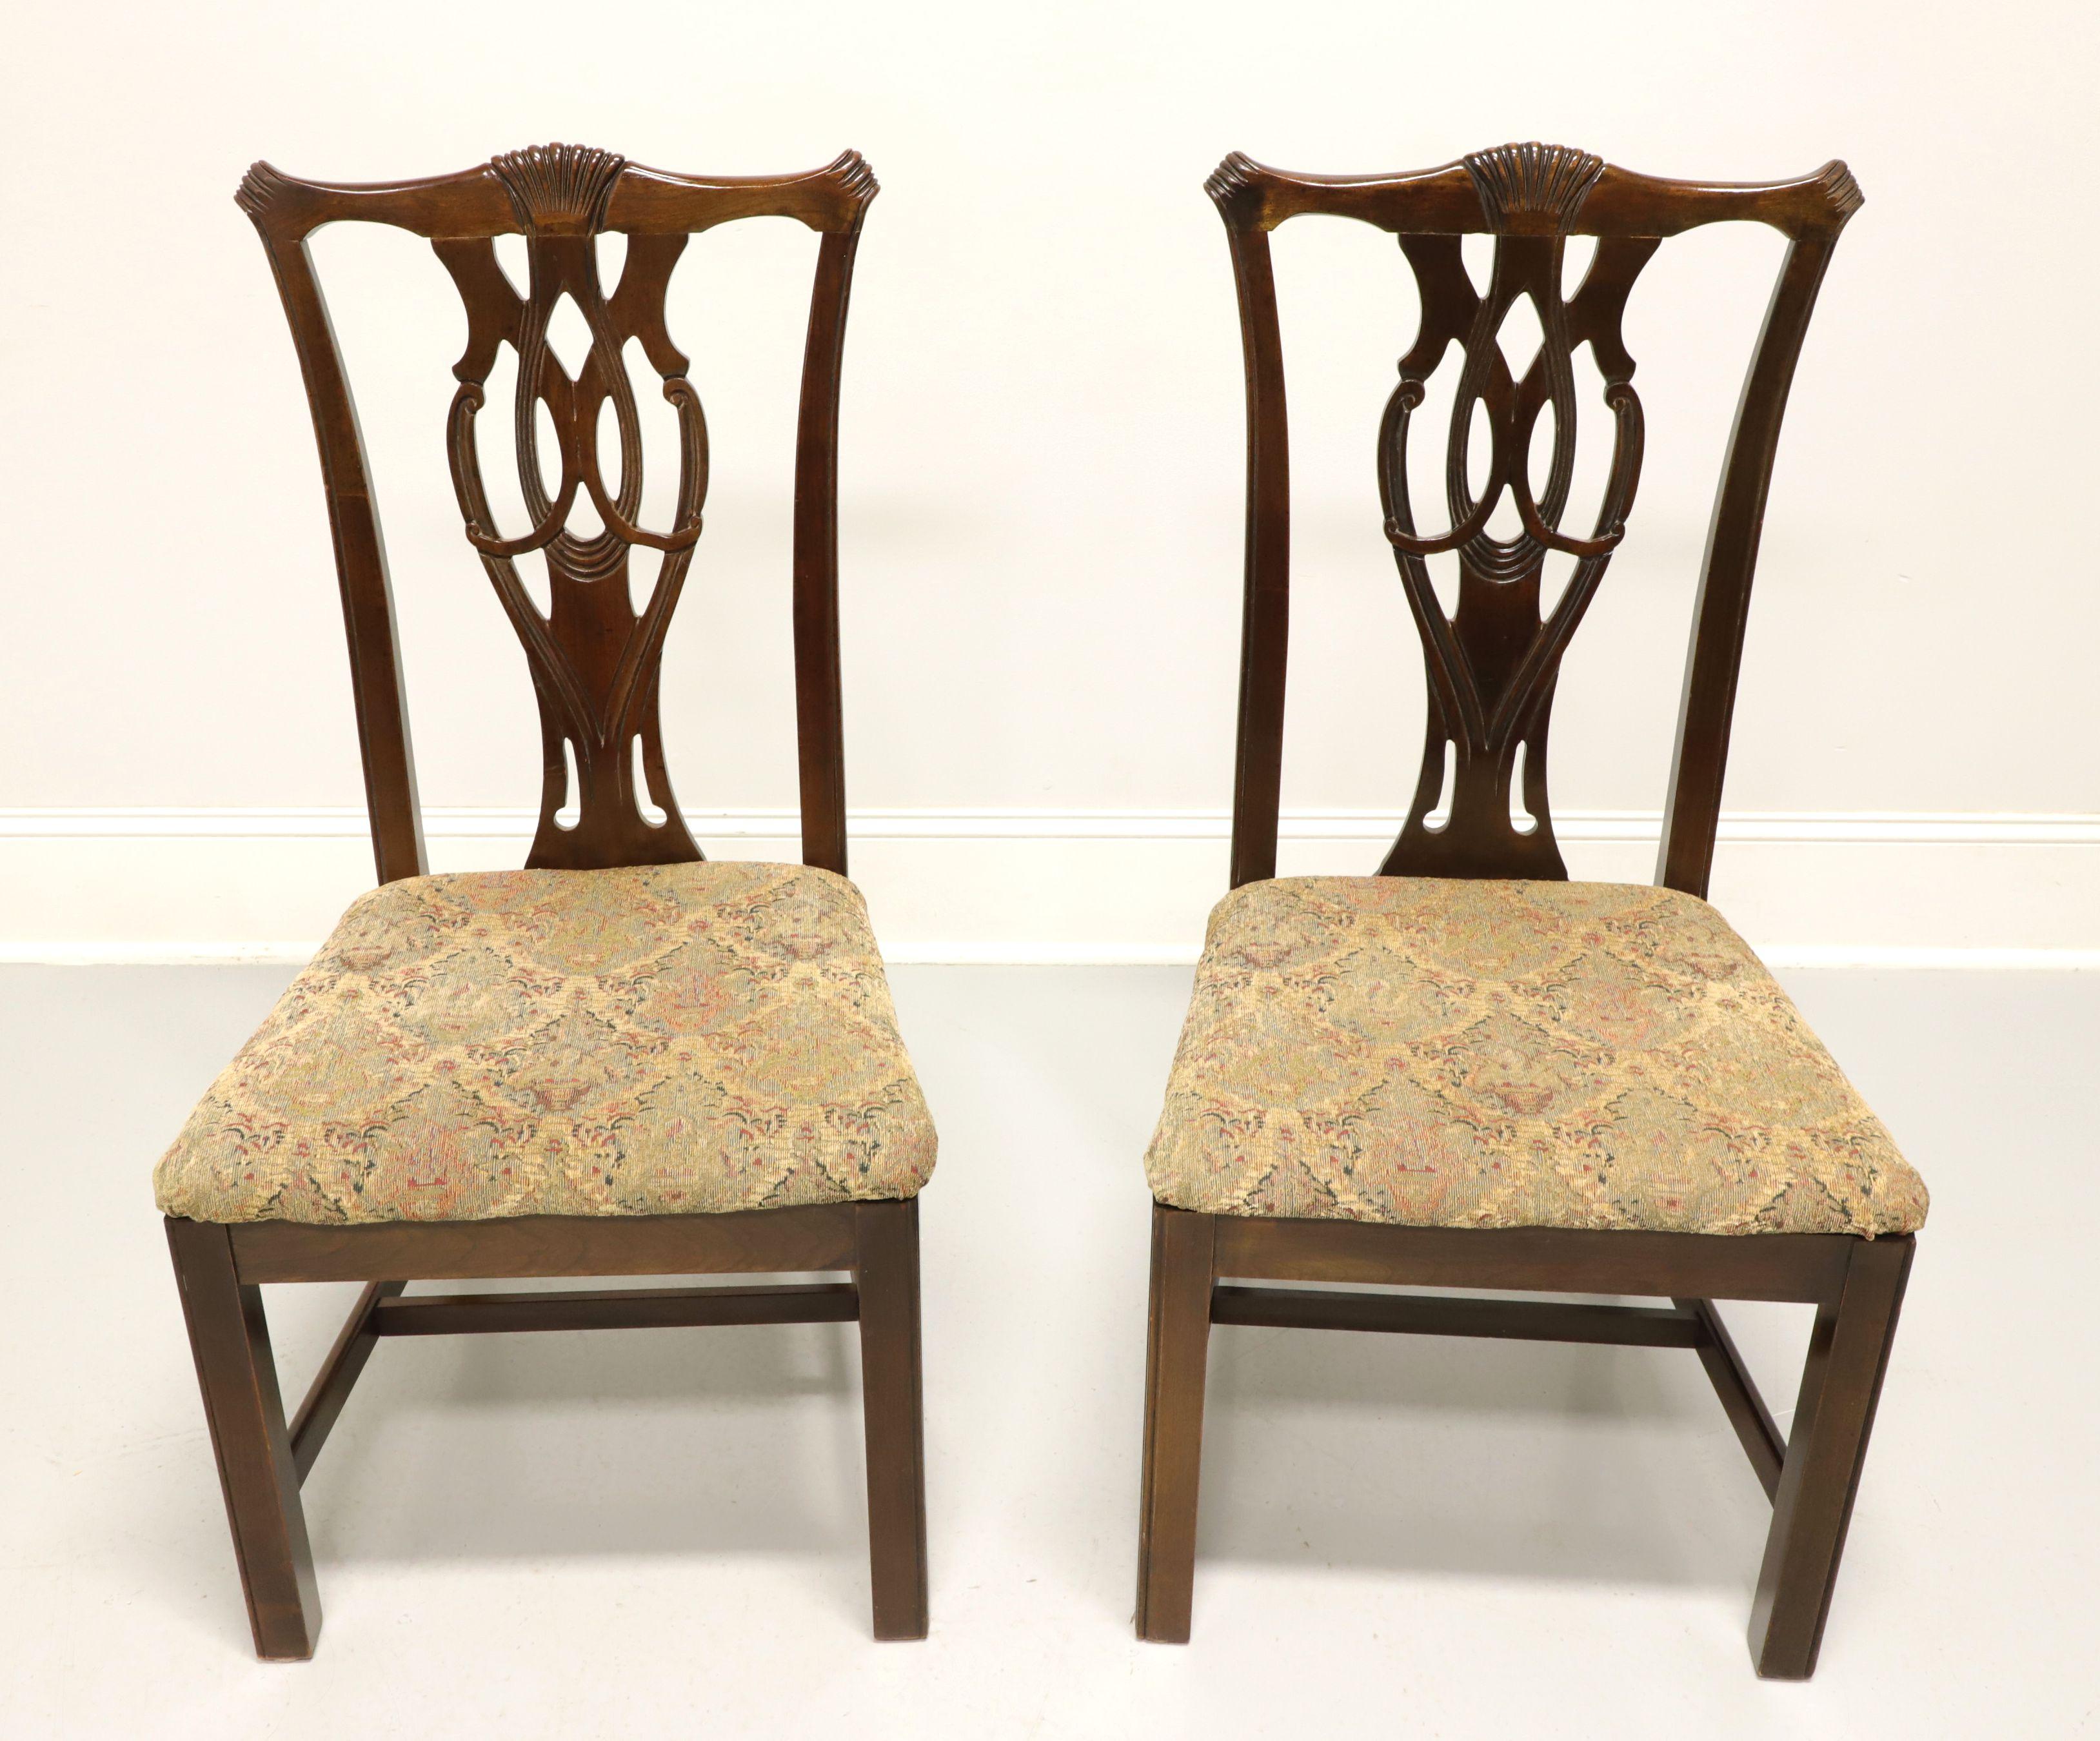 A pair of dining side chairs in the Chippendale style by Thomasville. Solid cherry with carved crest rail, carved seat back, multi-color pattern fabric upholstered seat, straight legs and stretchers. Made in Thomasville, North Carolina, USA, in the